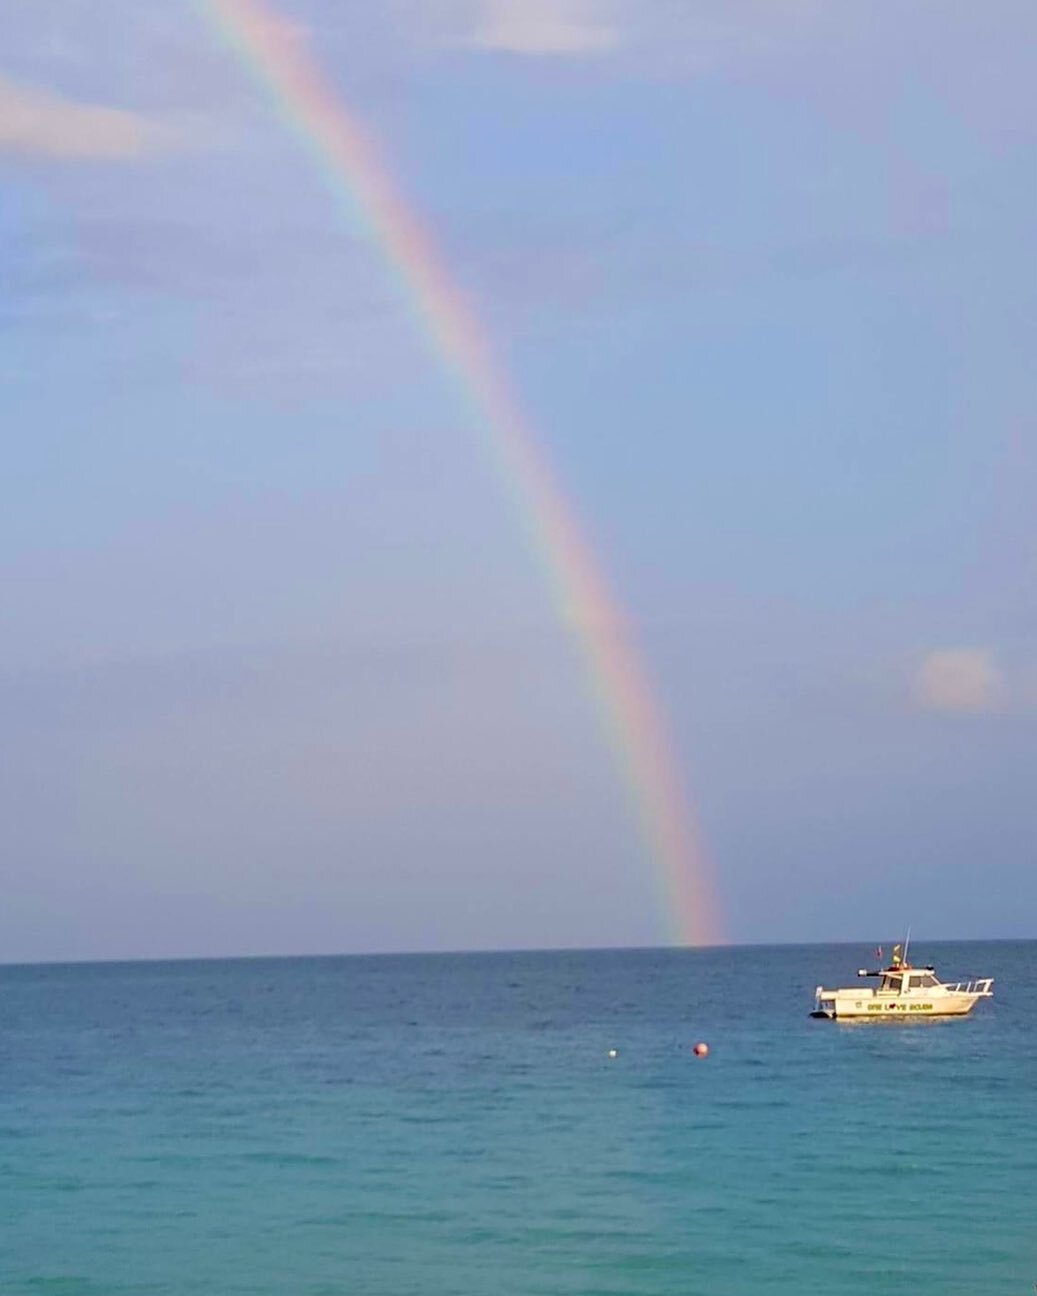 &ldquo;Somewhere over the rainbow, skies are blue, and the dreams that you dare to dream, really do come true.&rdquo; -Yip Harburg,Harold Arlen made famous by Judy Garland and now One Love Scuba #dreamjamaica #divejamaica #sooncome #onelovescubacente